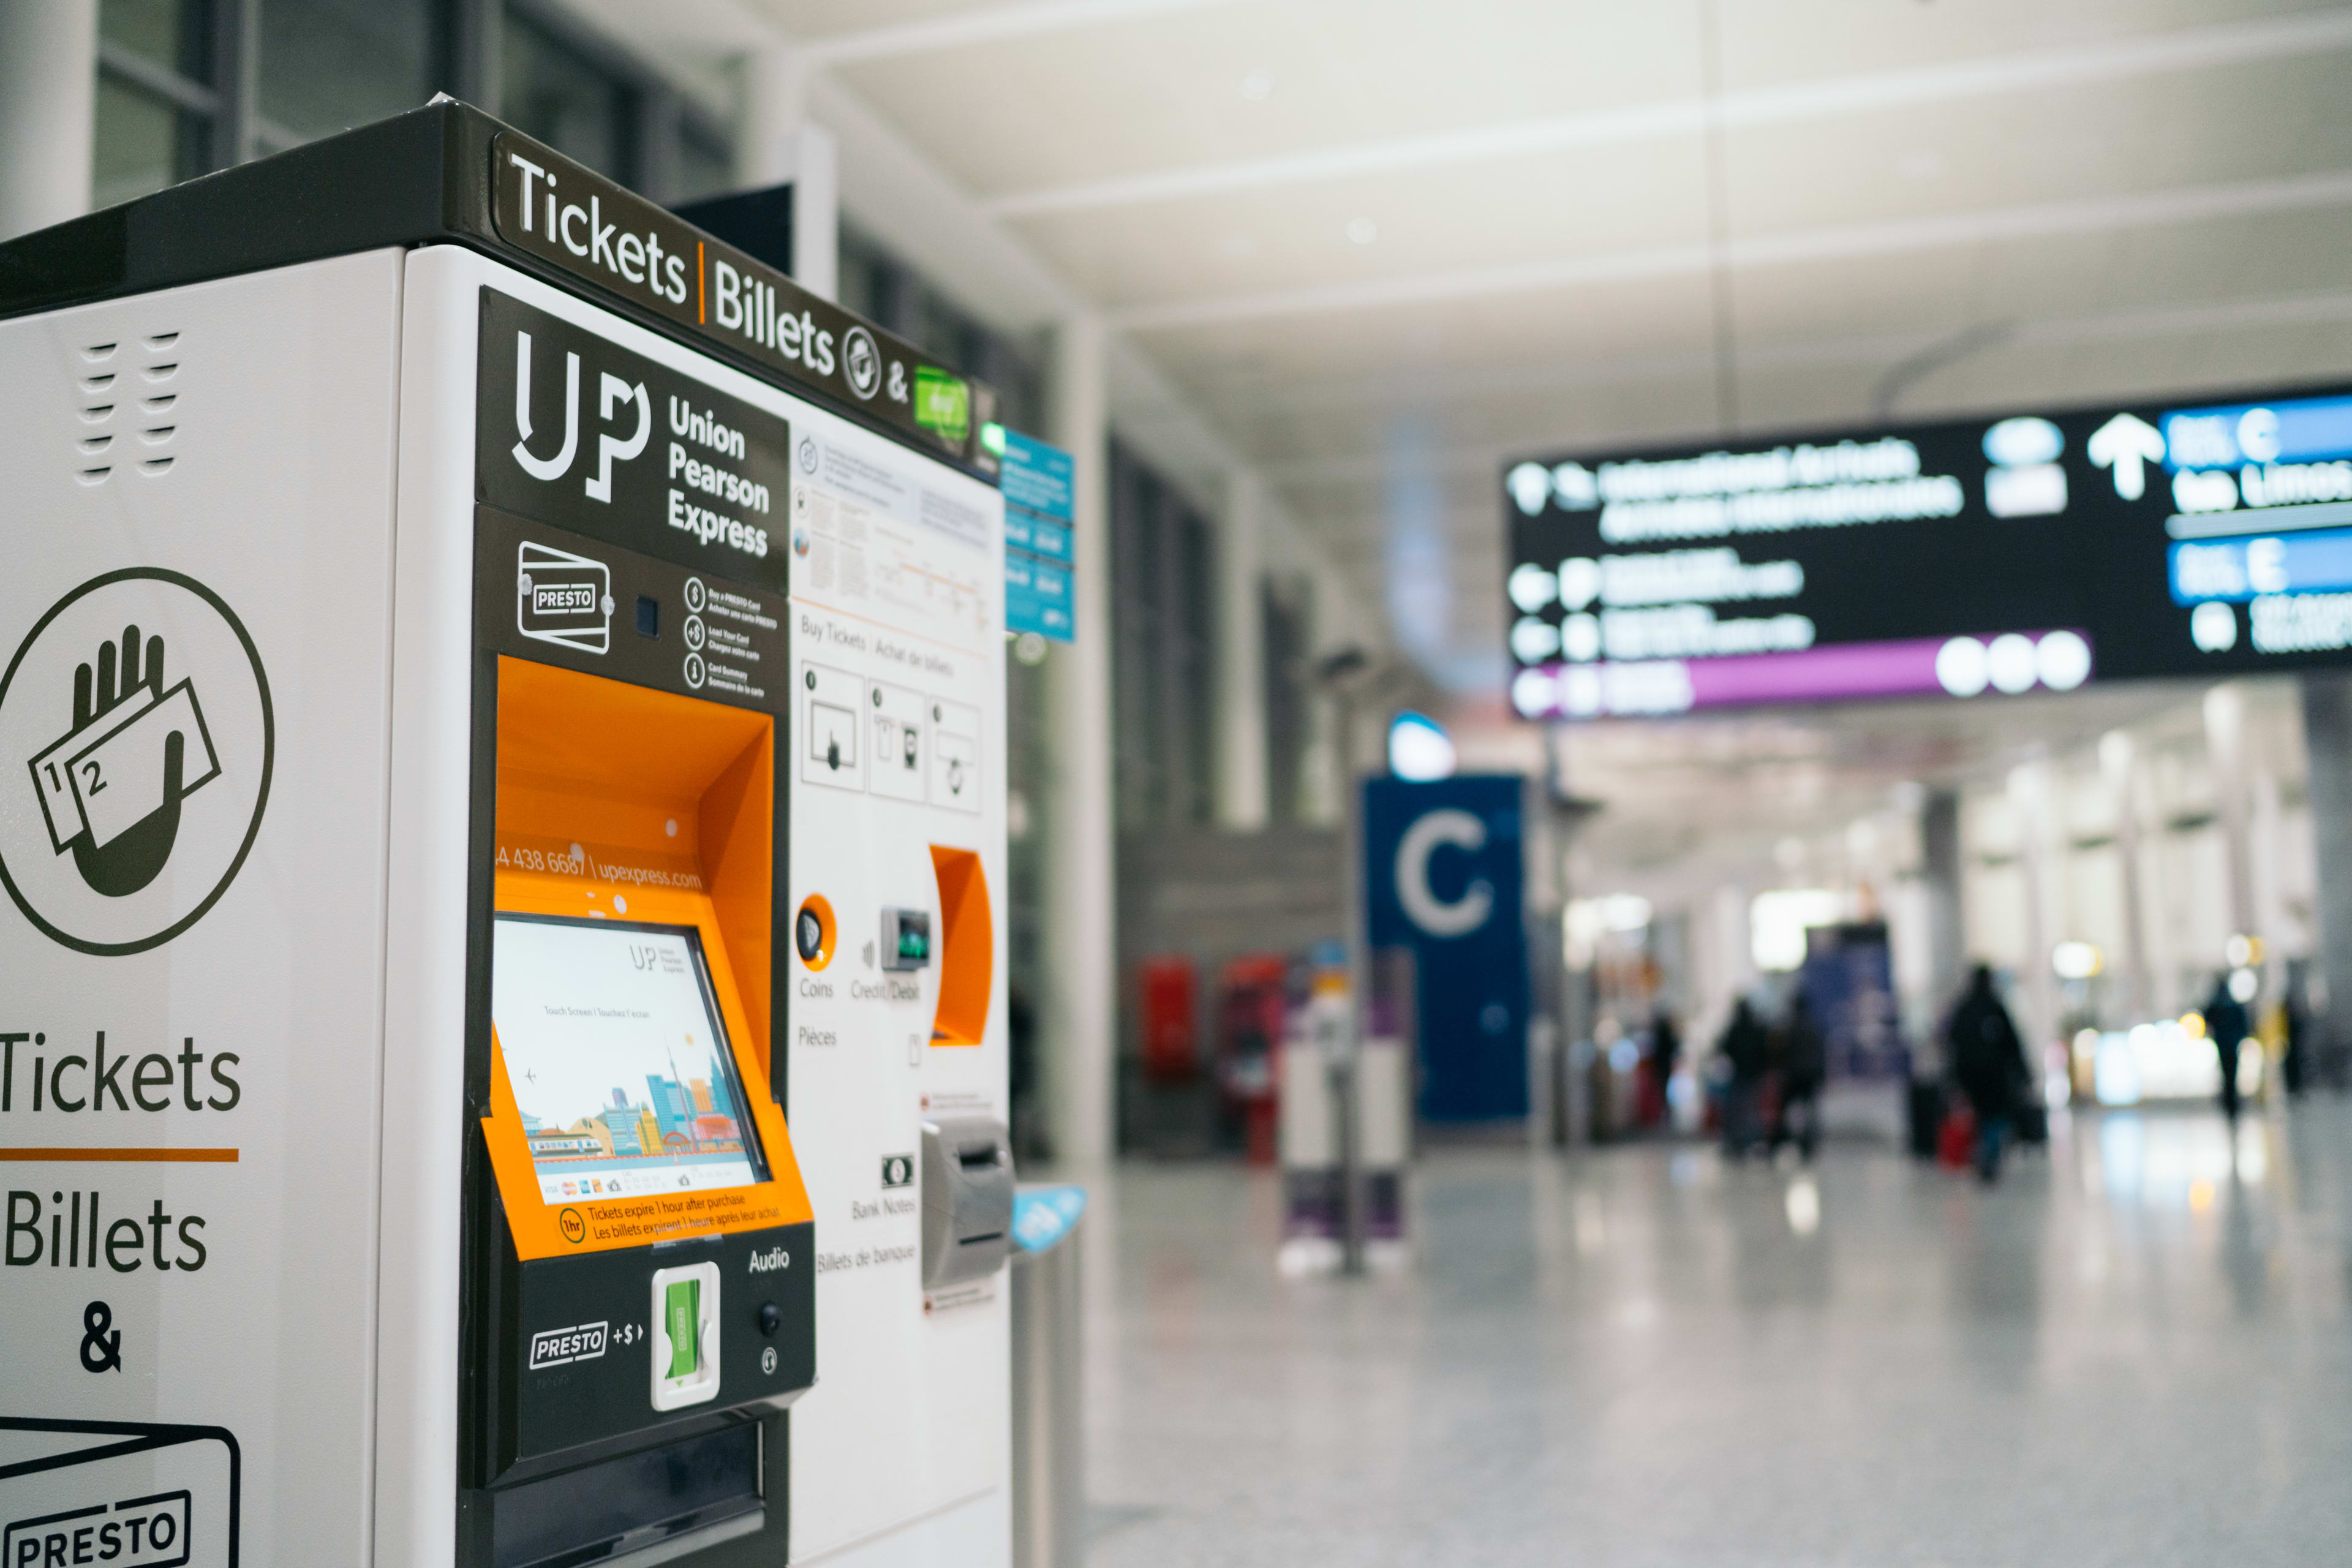 UP Express ticket vending machine (TVM) at Pearson Airport